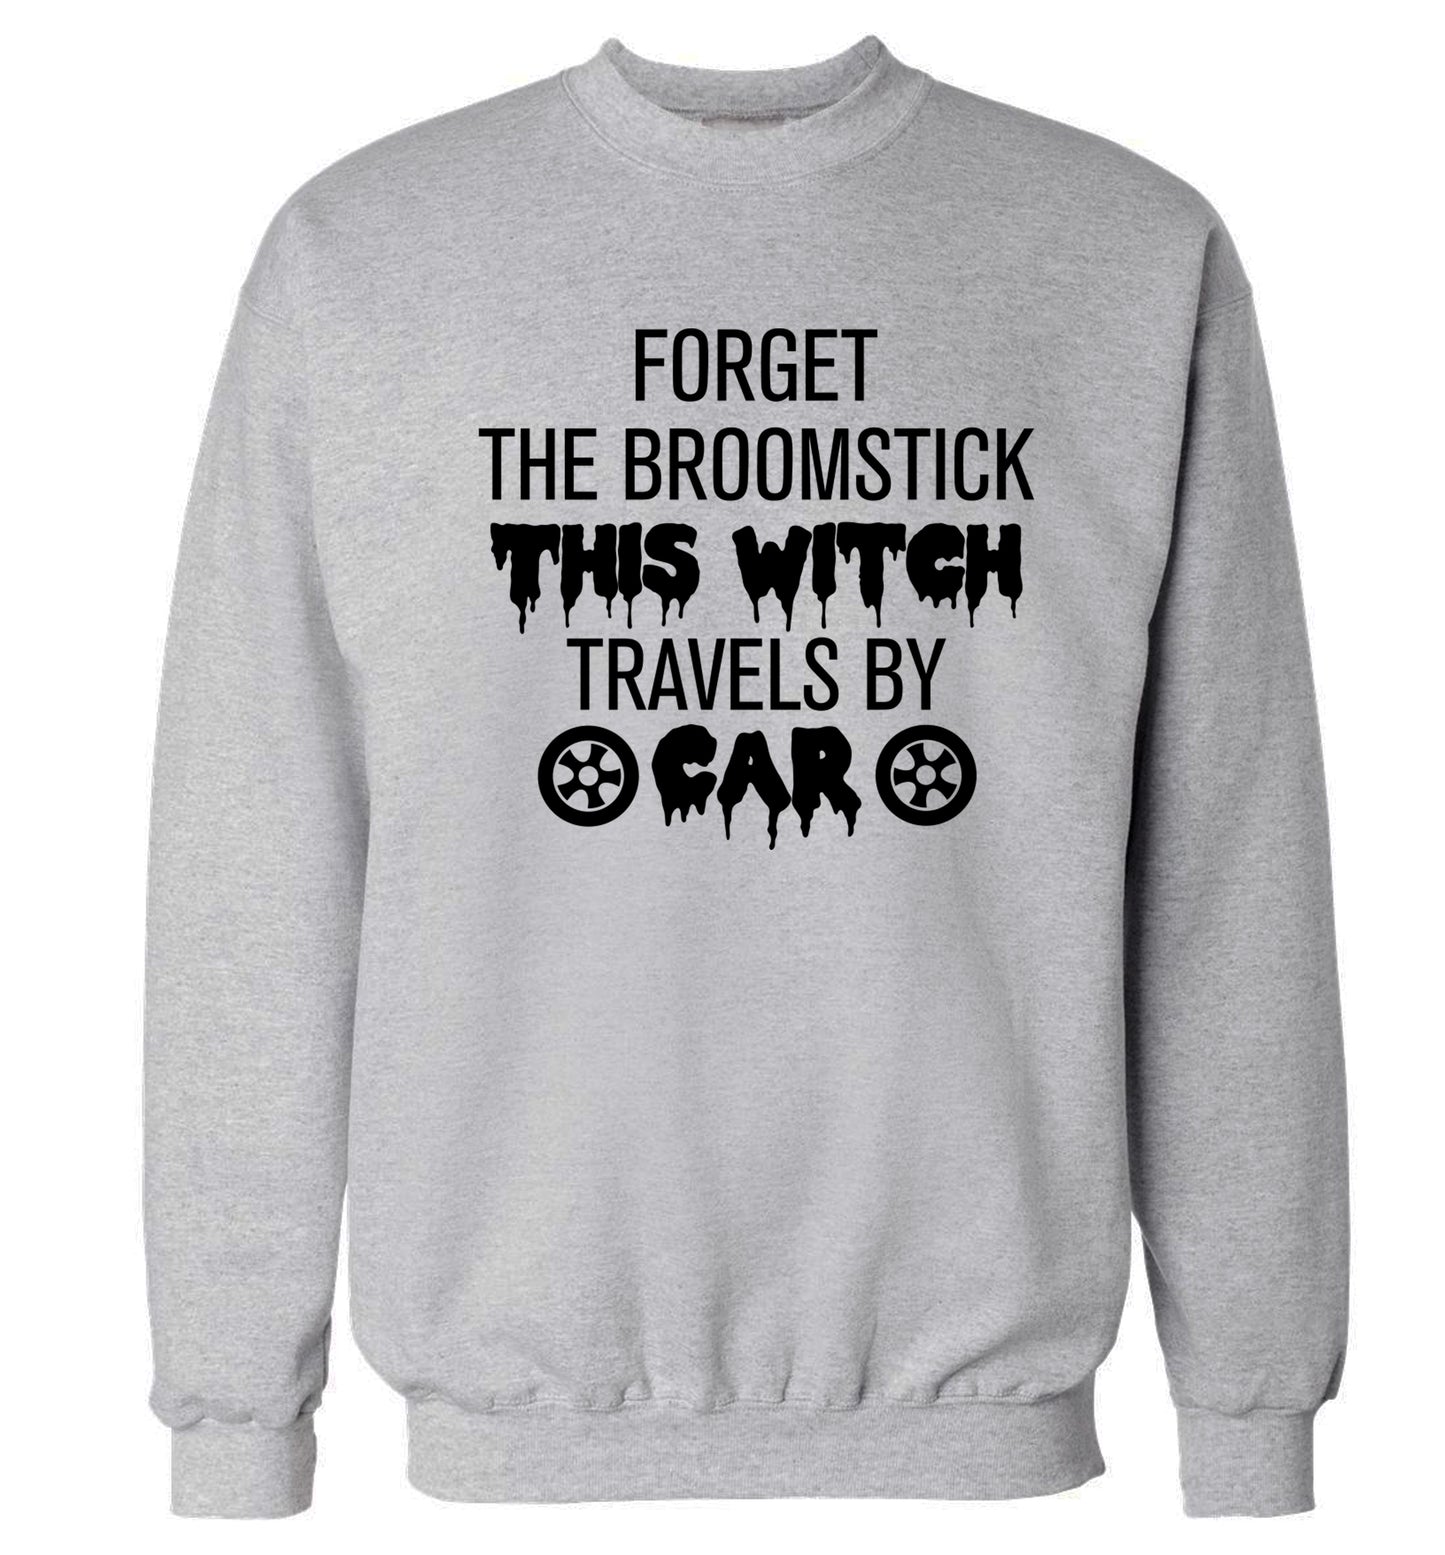 Forget the broomstick this witch travels by car Adult's unisexgrey Sweater 2XL